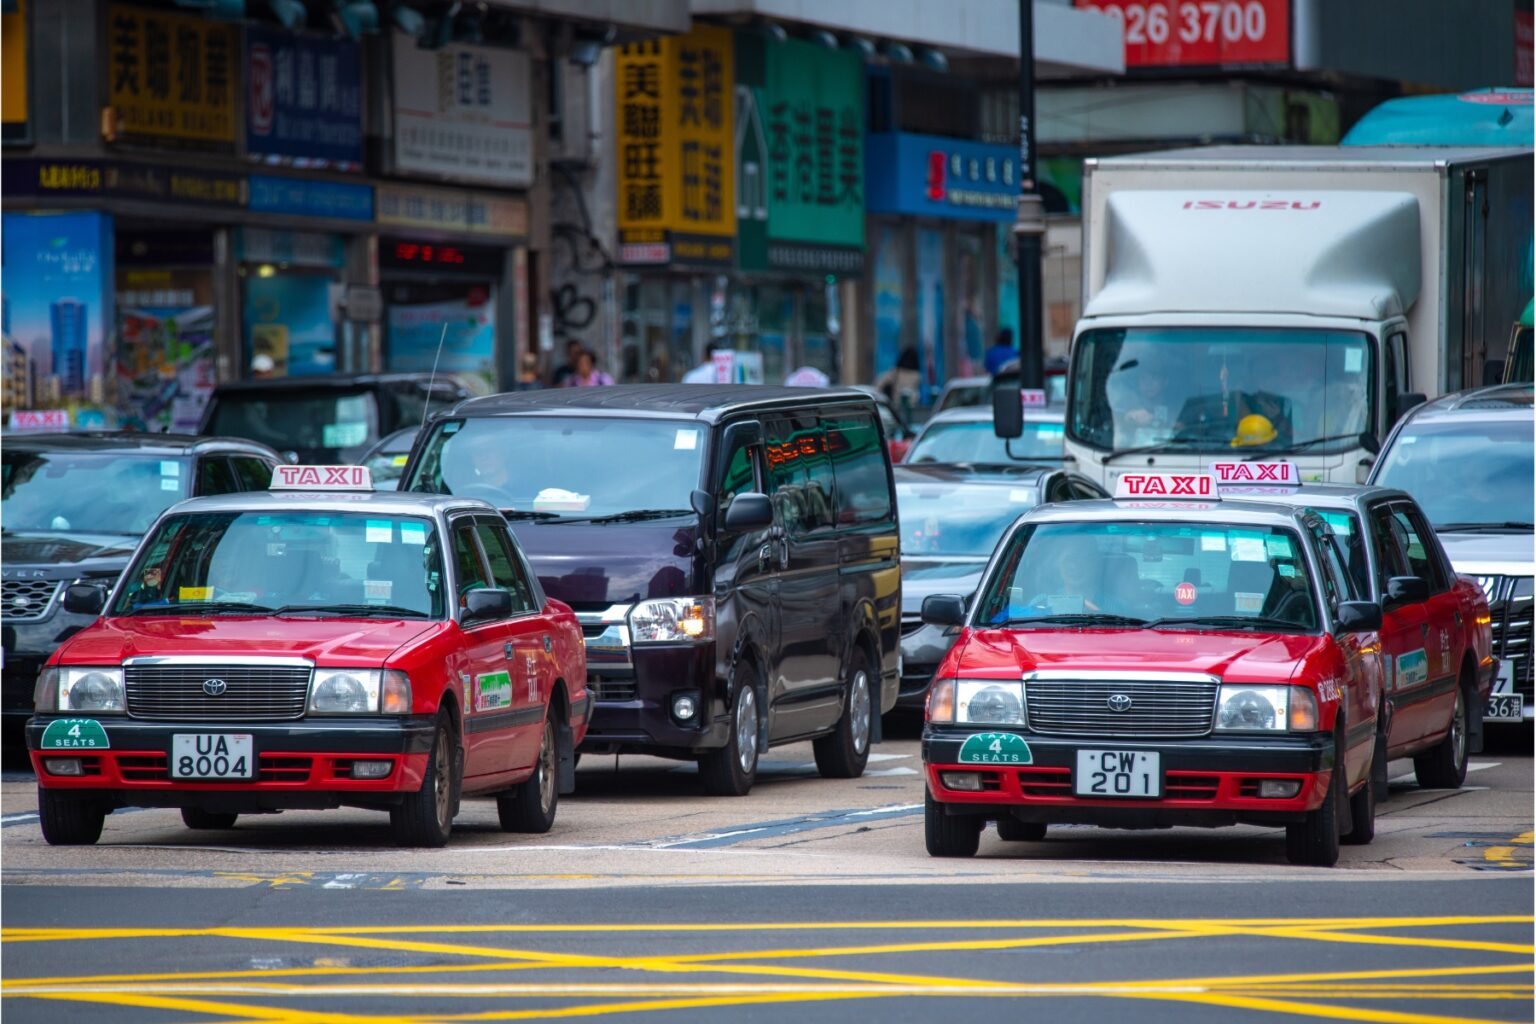 hong kong taxis to accept e-payments on chinese apps